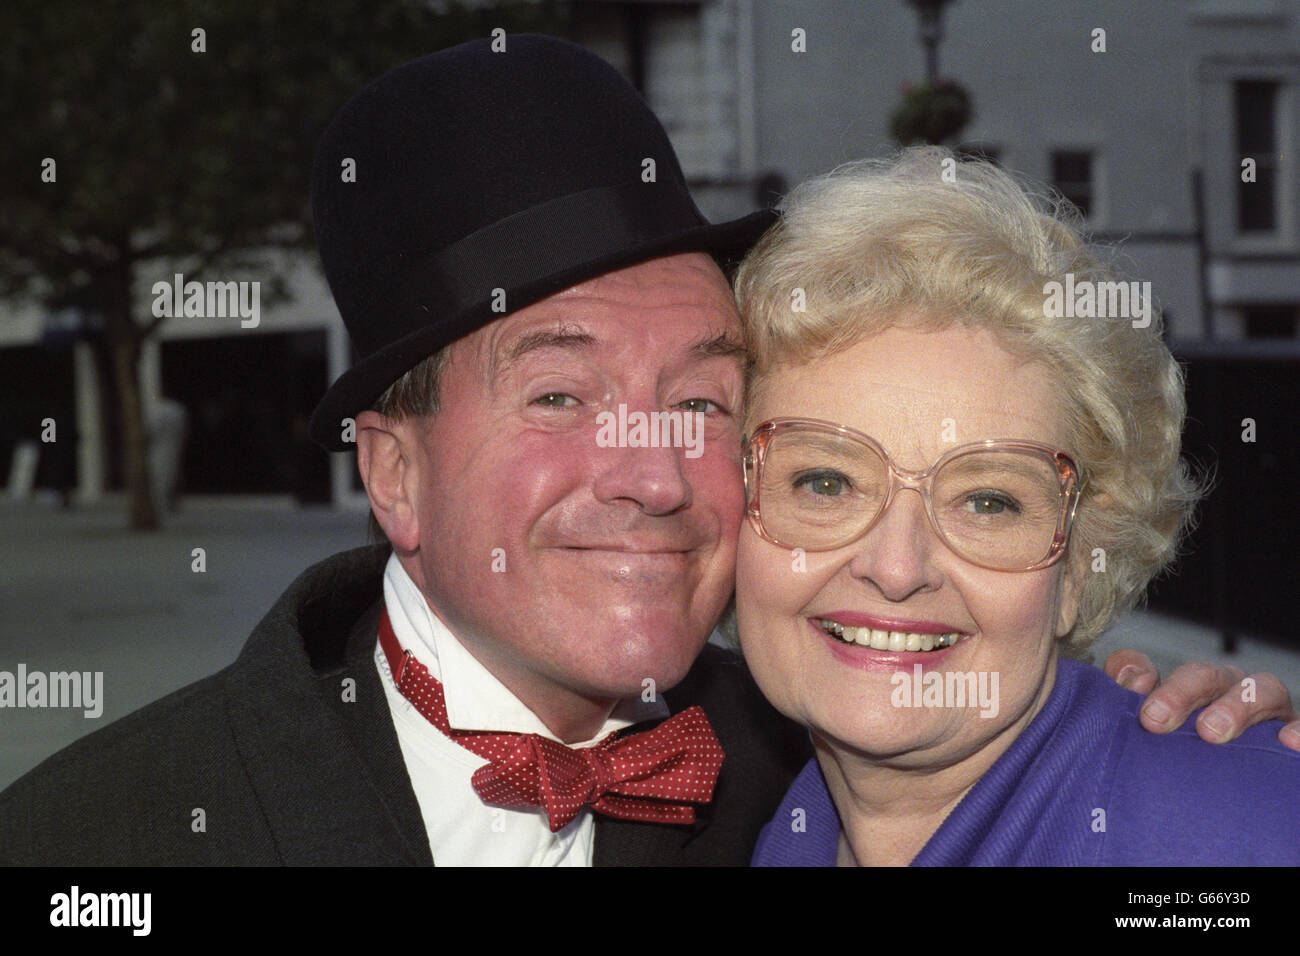 Lois Laurel, daughter of comedian Stan Laurel, poses with entertainer Roy Castle, who is dressed as her famous father. They were promoting the video release of the colourised version of the 1937 Laurel and Hardy classic Way Out West. Stock Photo